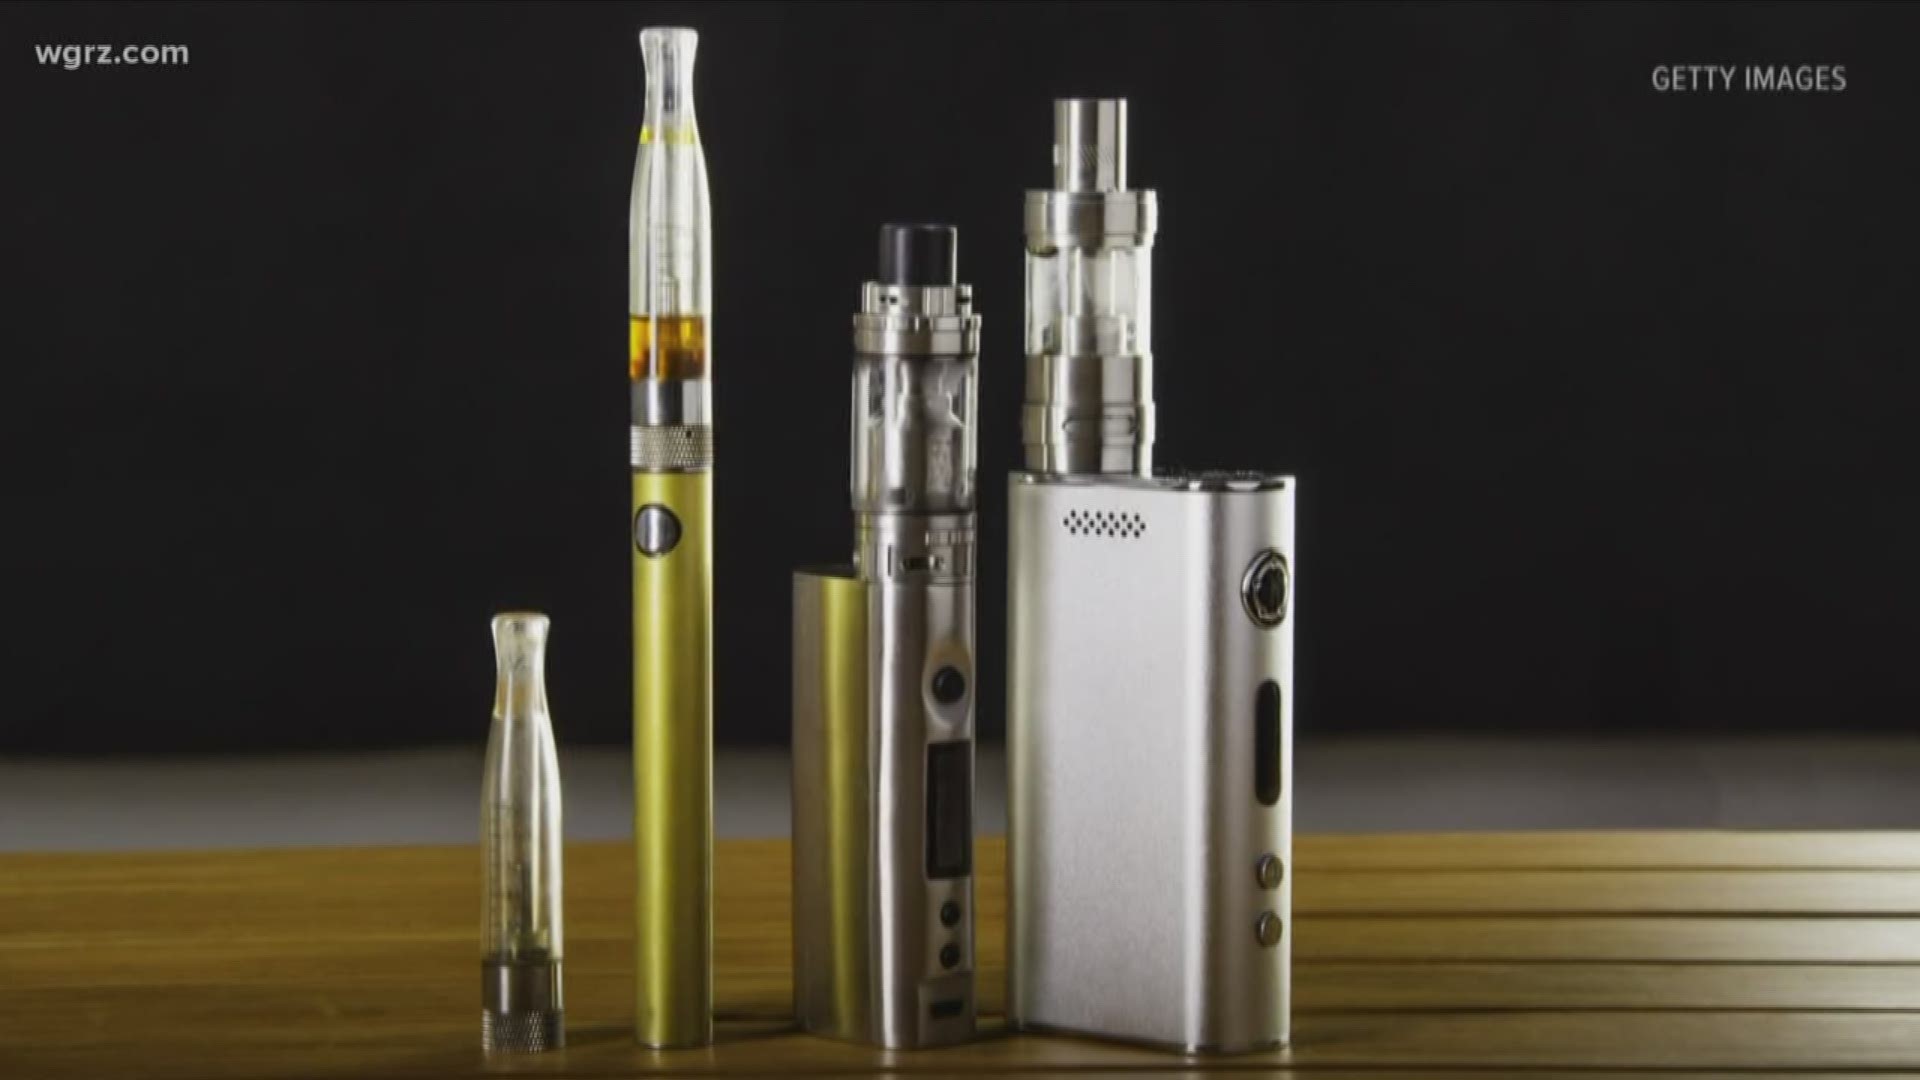 State health dept. launches vaping probe